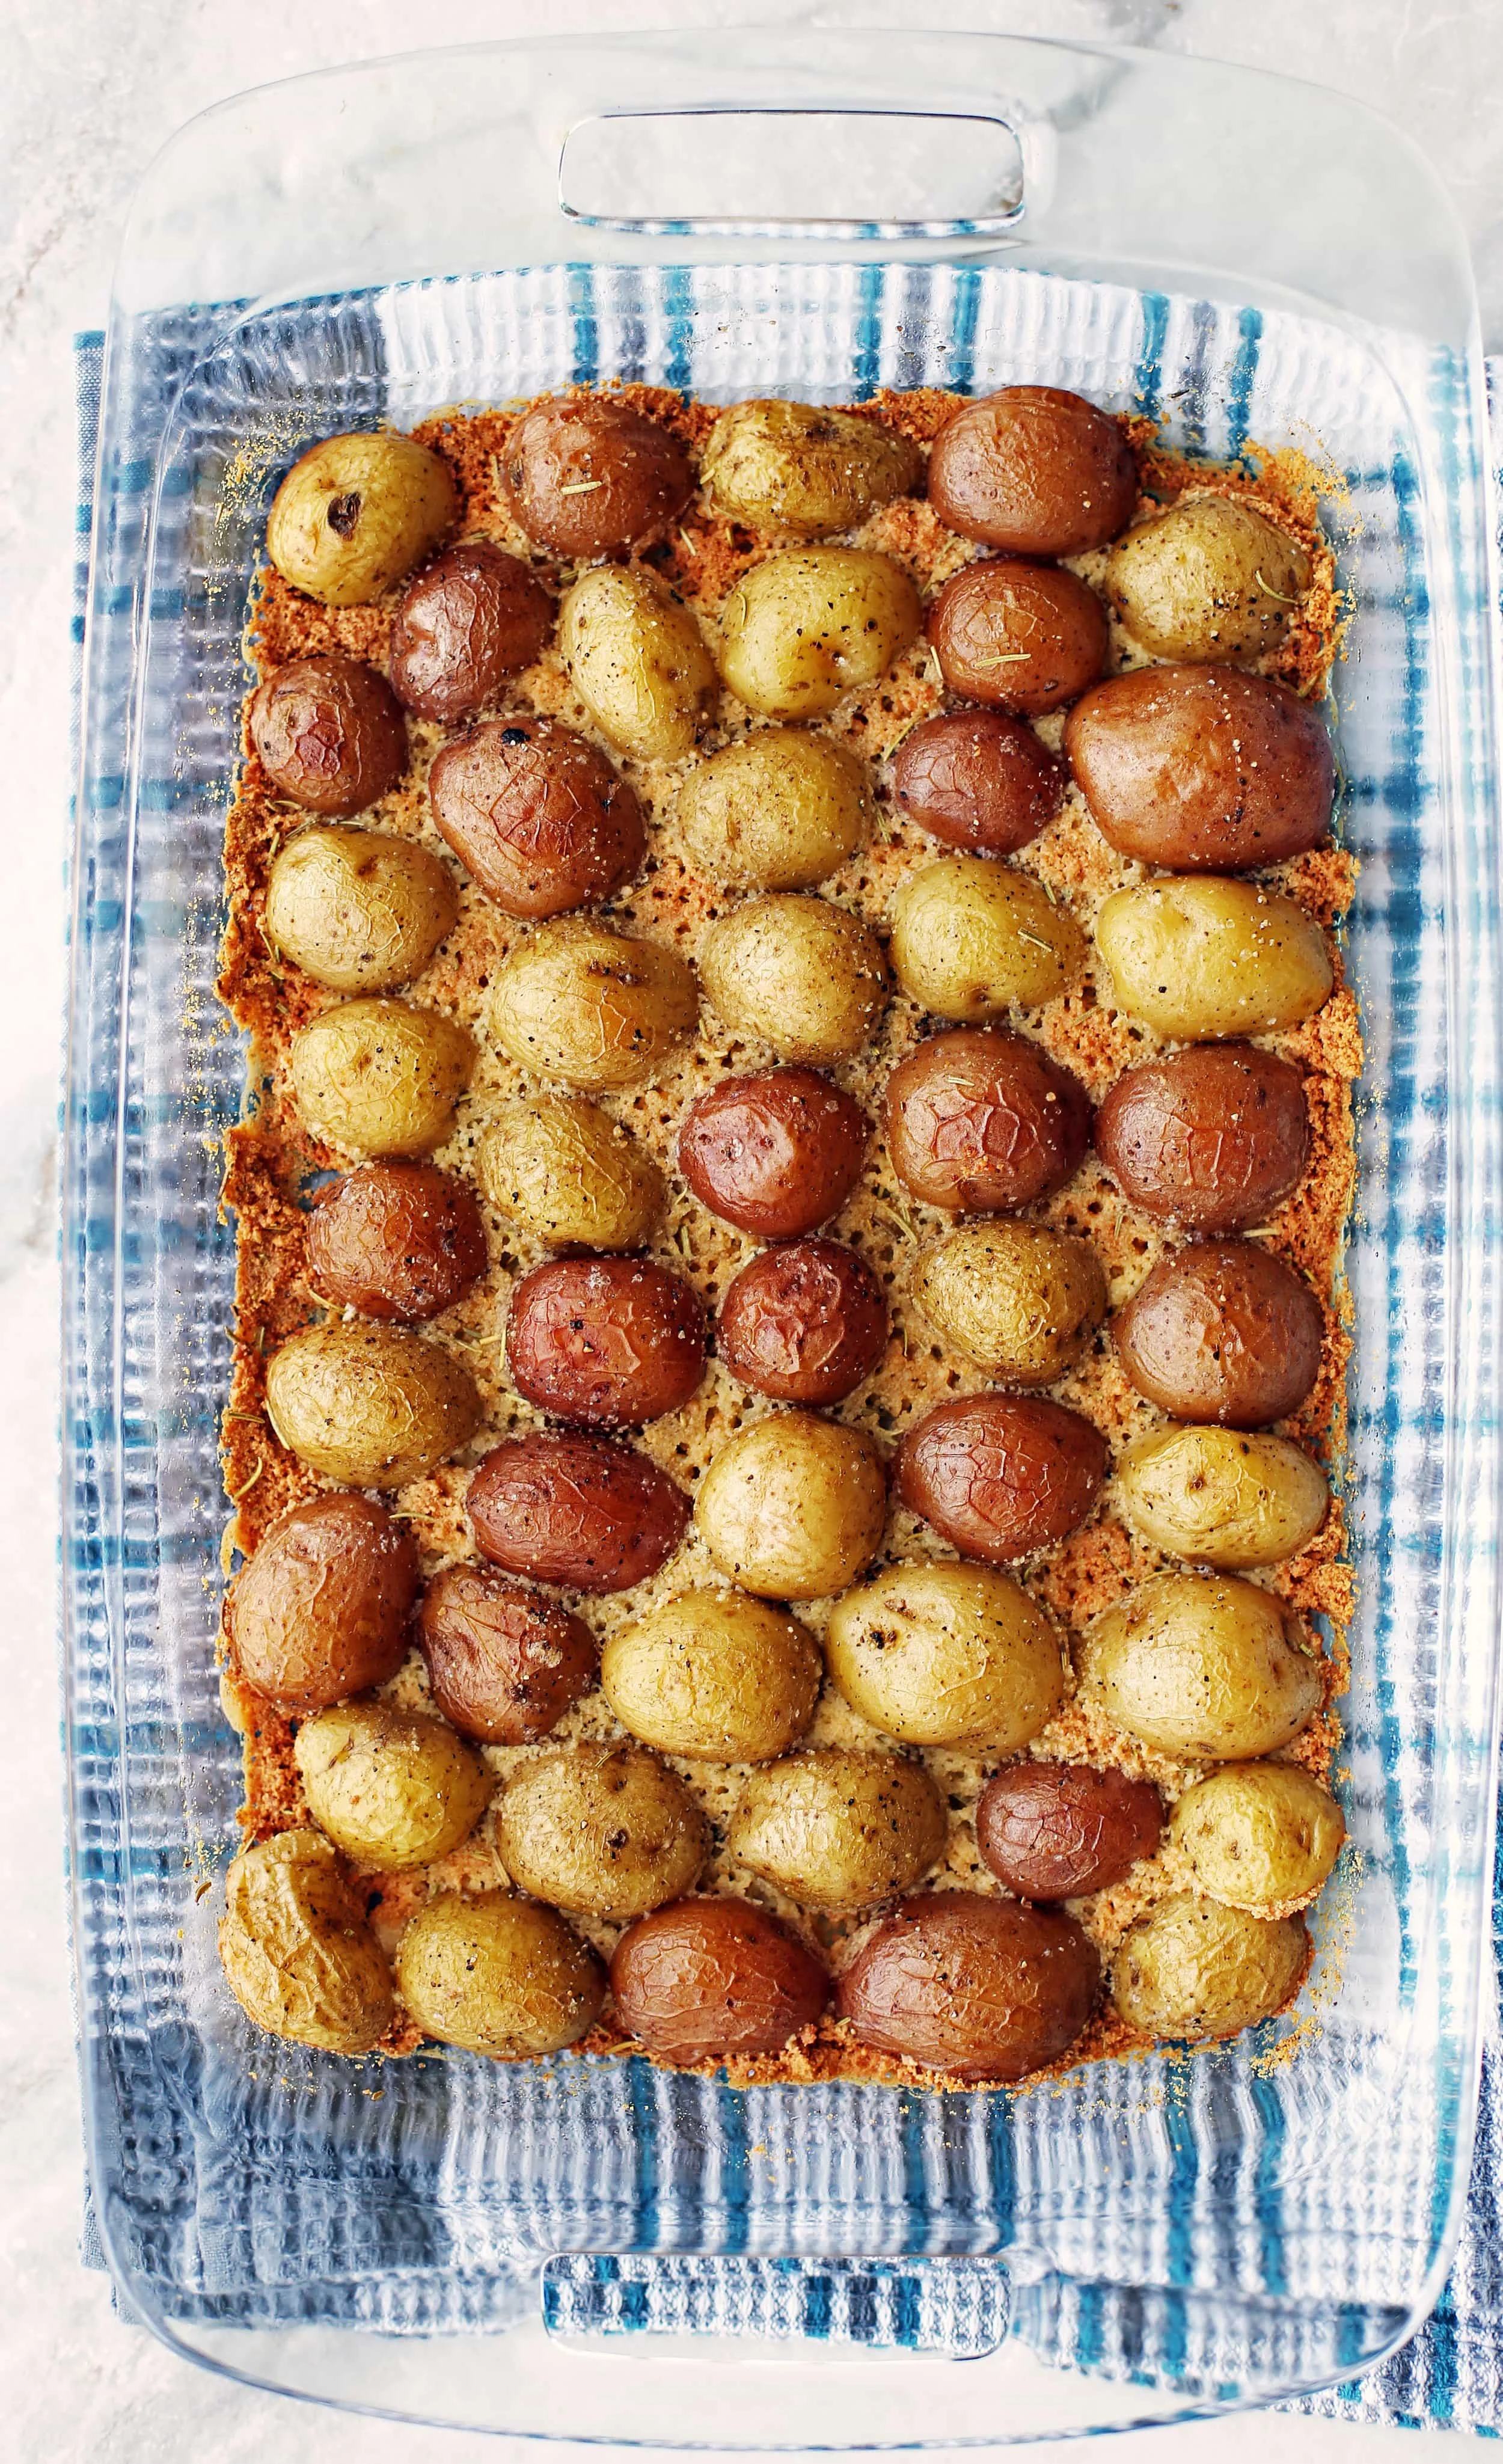 Baked Crispy Parmesan Crusted Baby Potatoes in a single layer in a glass casserole dish.